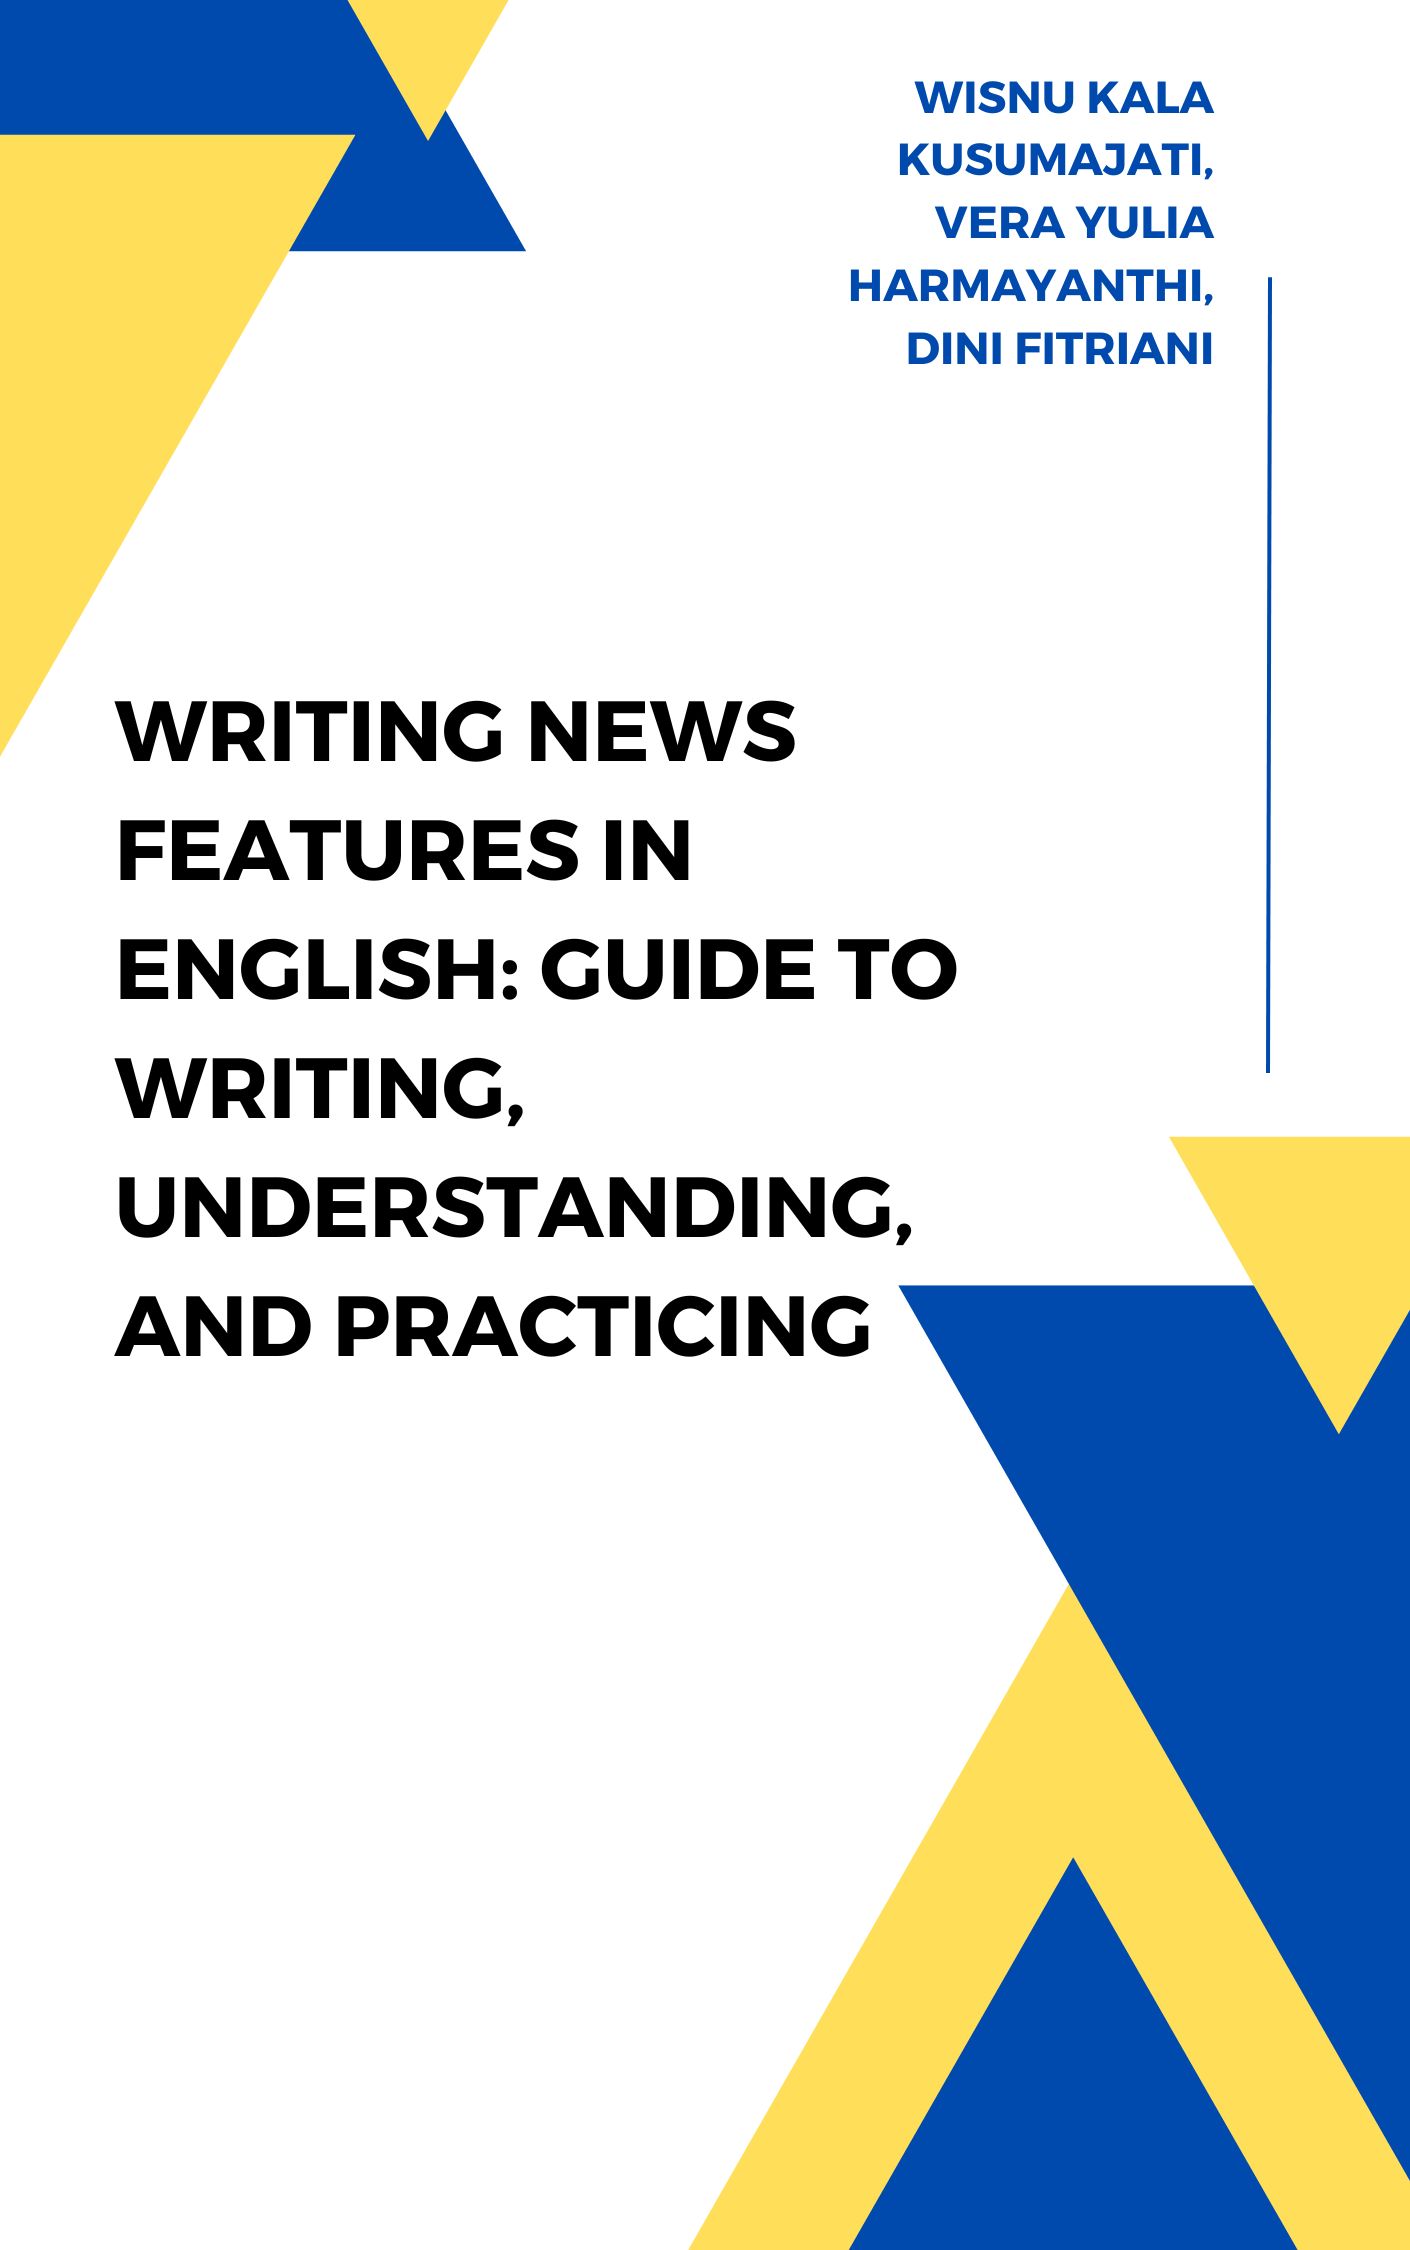 Writing News Features in English Guide to Writing, Understanding, and Practicing